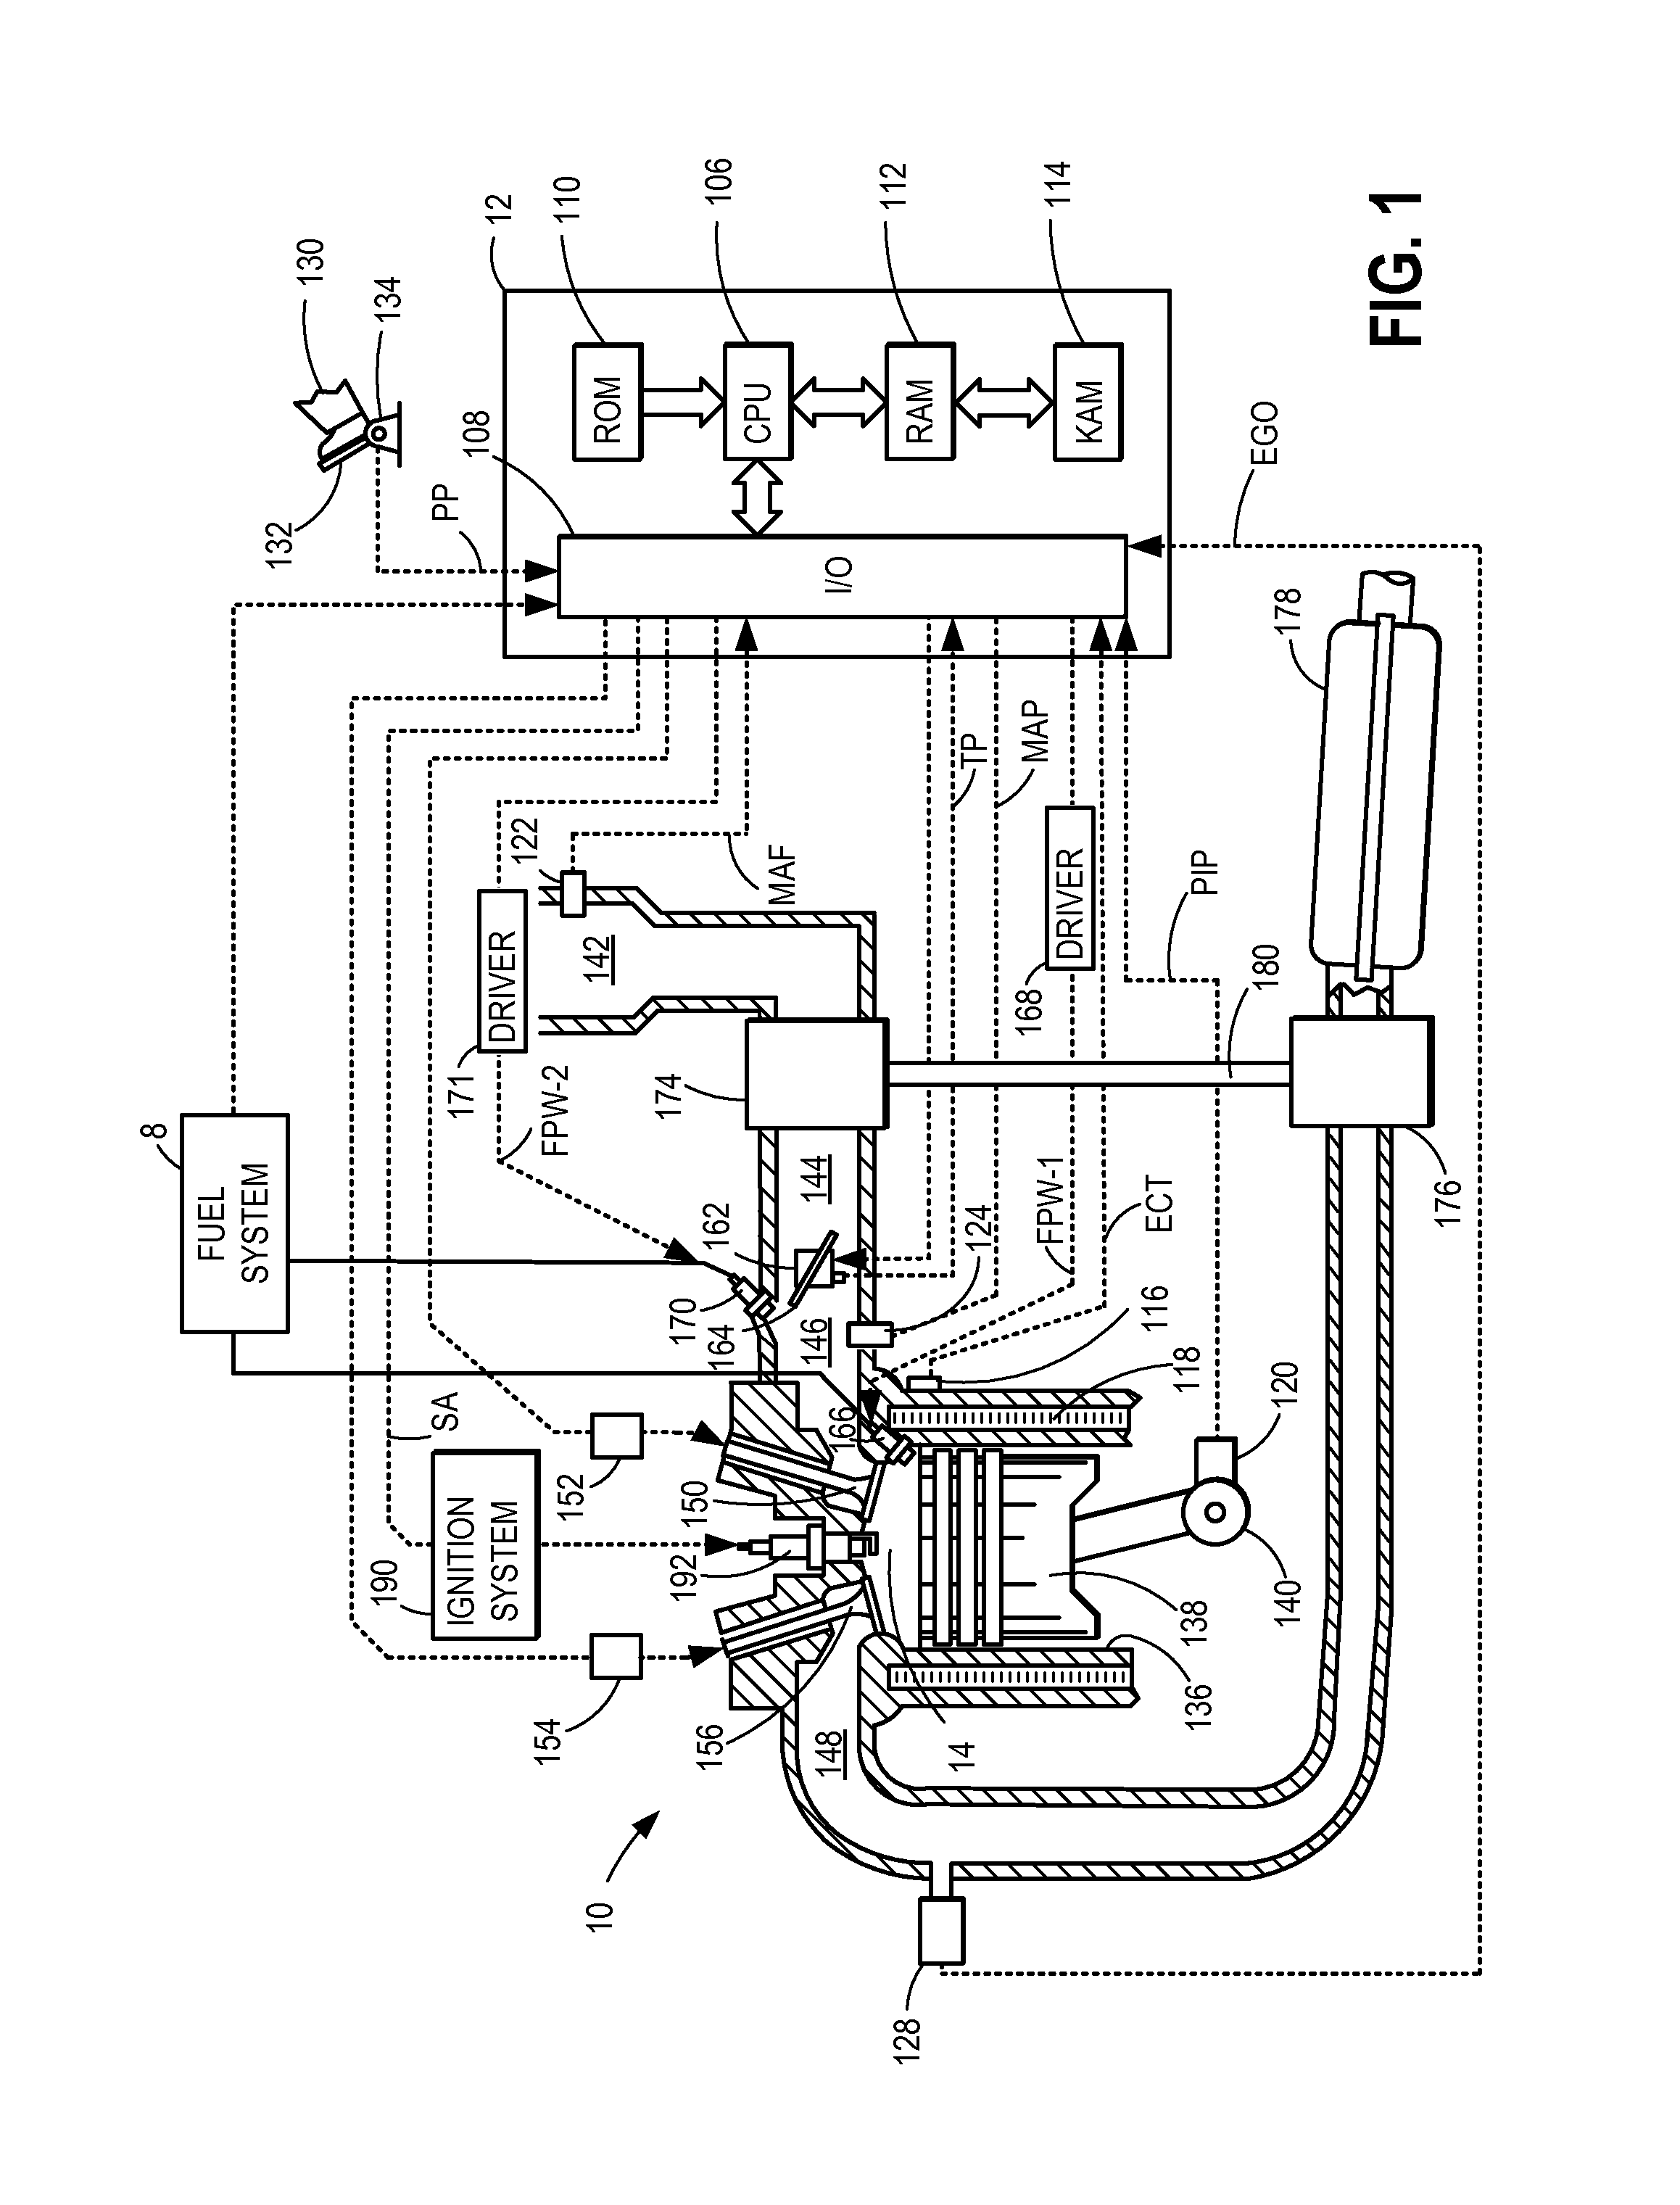 System and method for operating a direct injection fuel pump